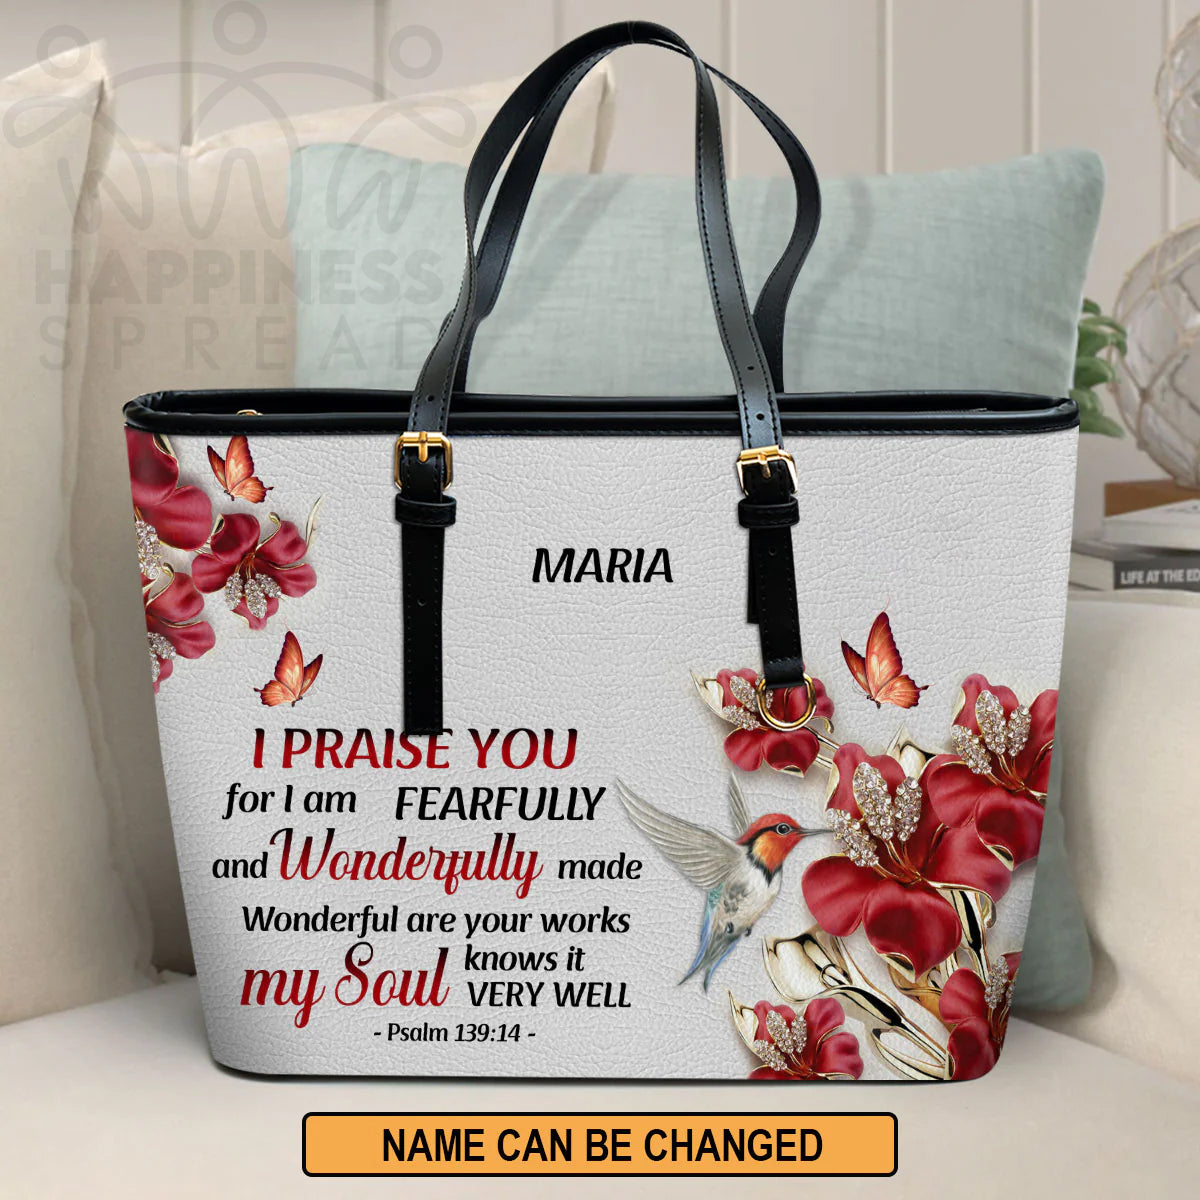 Christianart Handbag, Personalized Hand Bag, Wonderful Are Your Works, Personalized Gifts, Gifts for Women. - Christian Art Bag